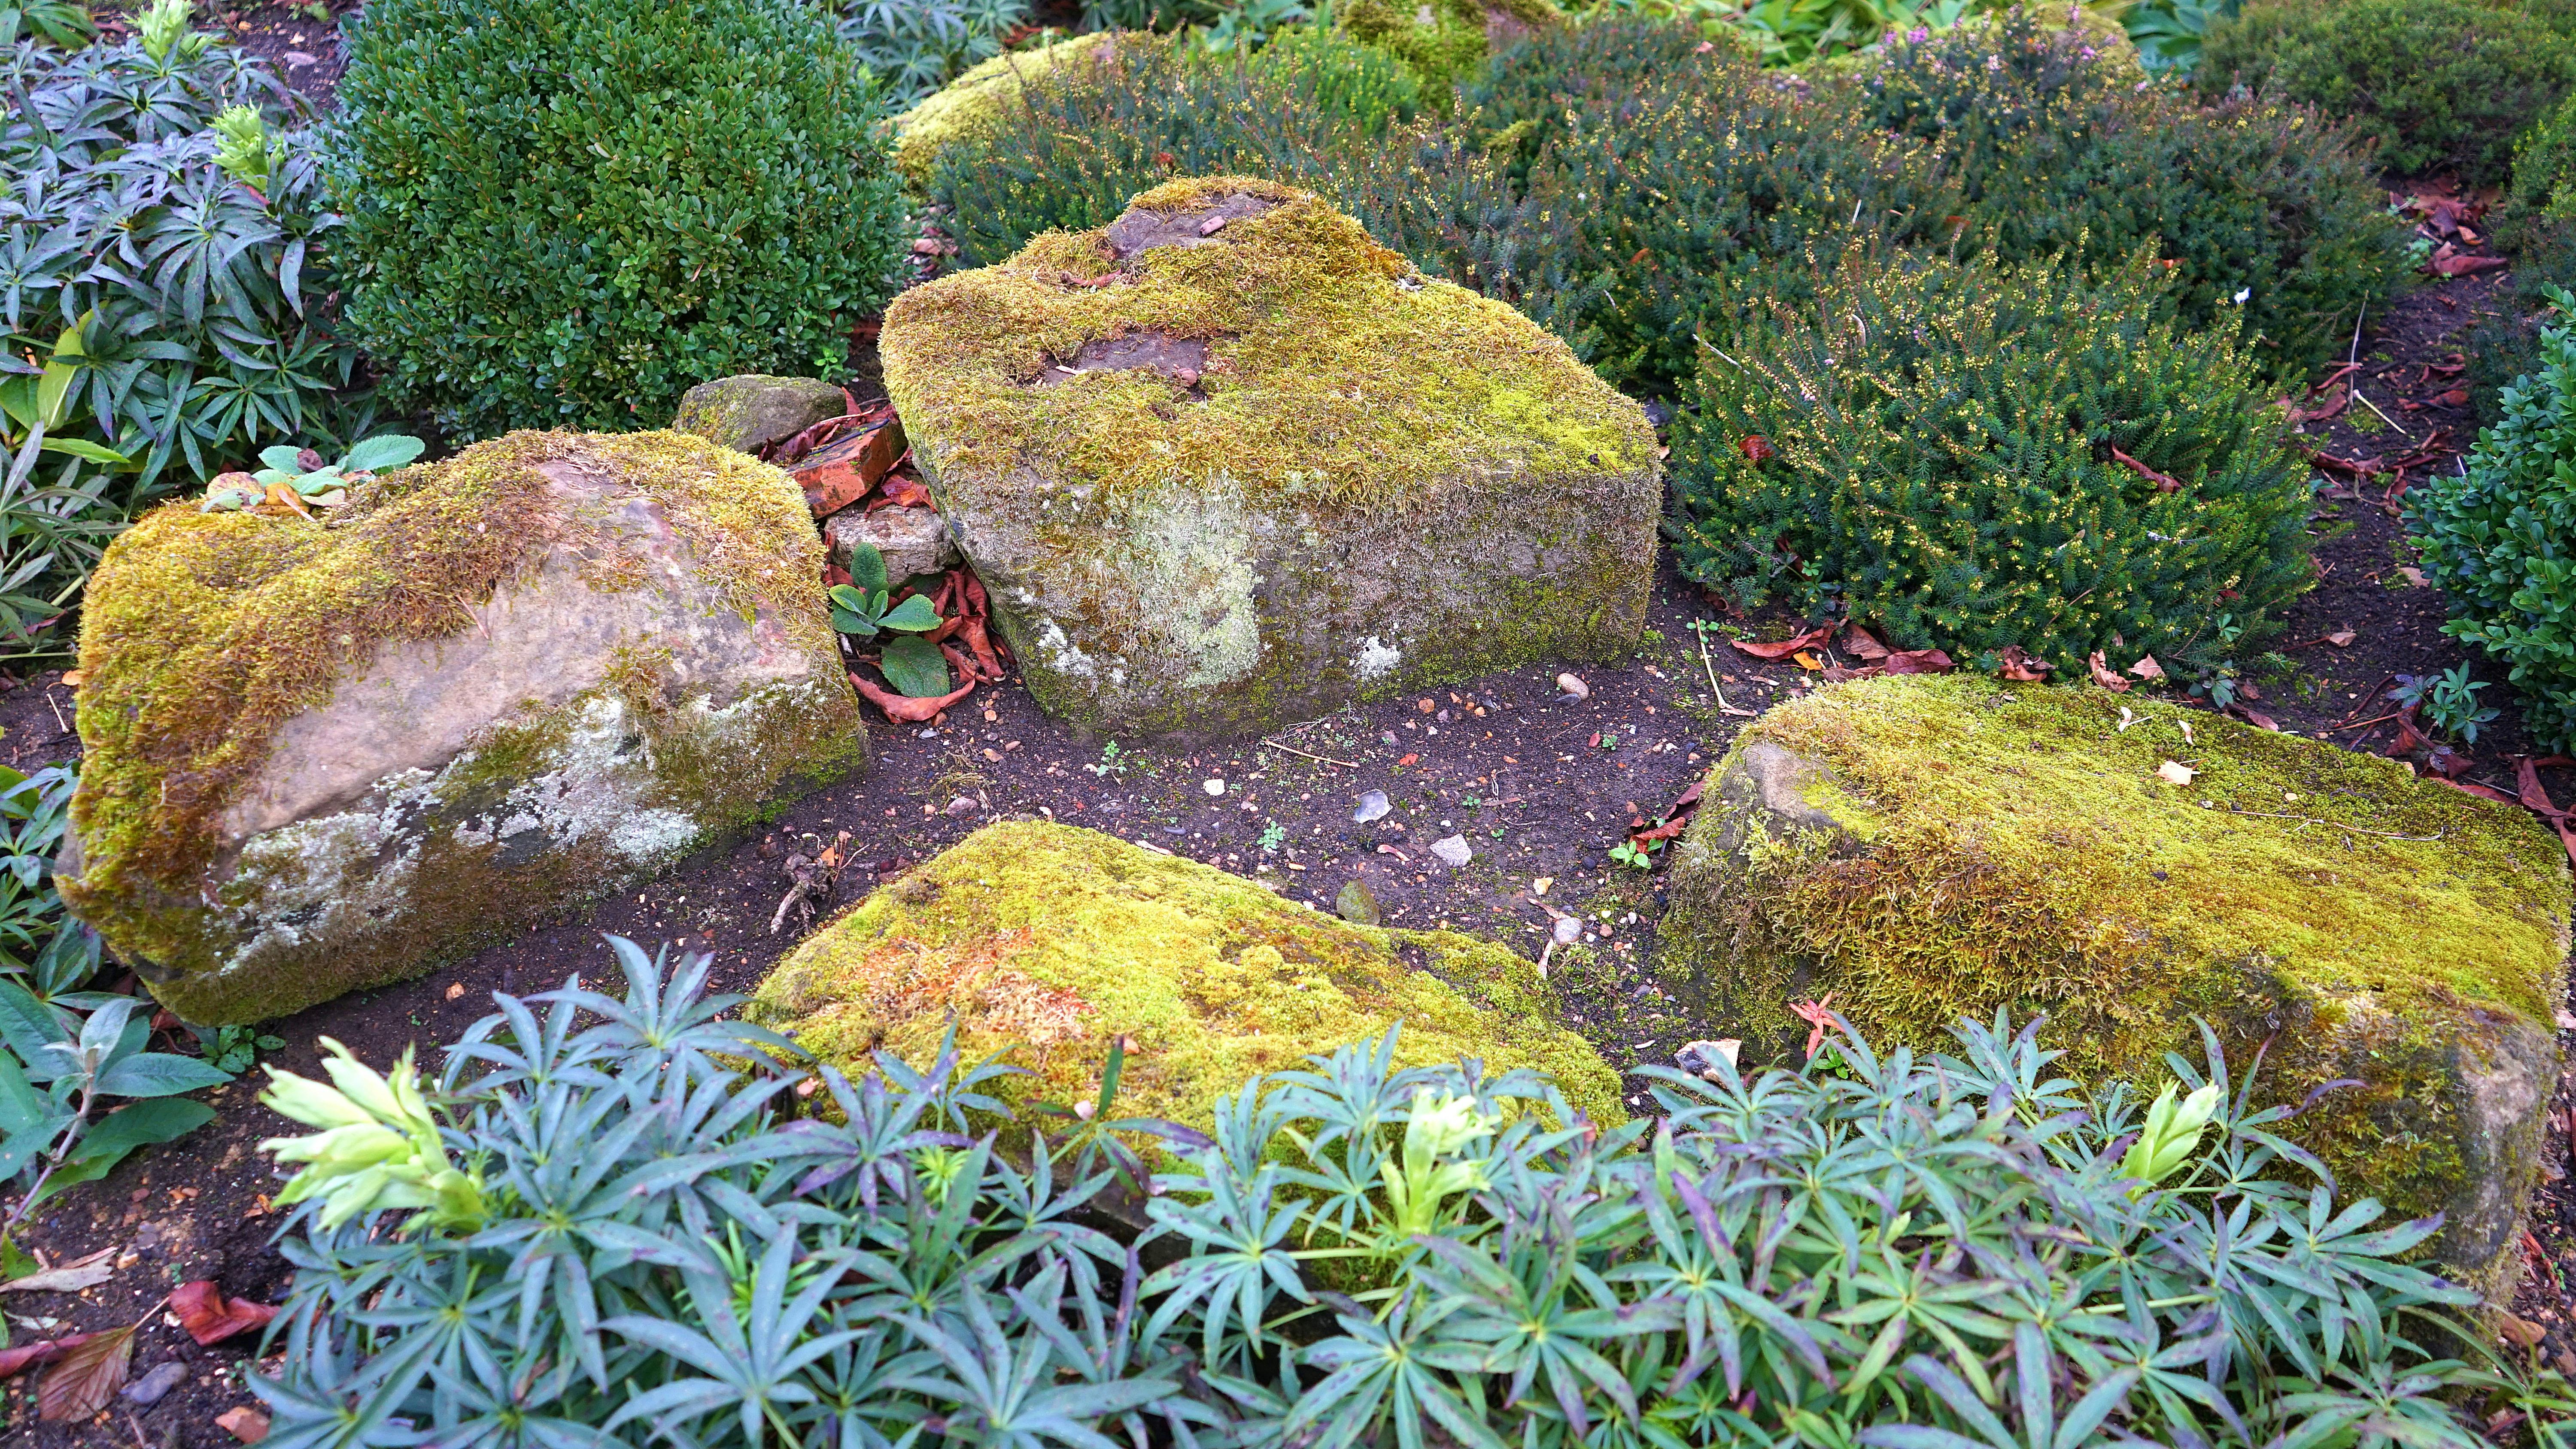 How to keep weeds from growing in rocks